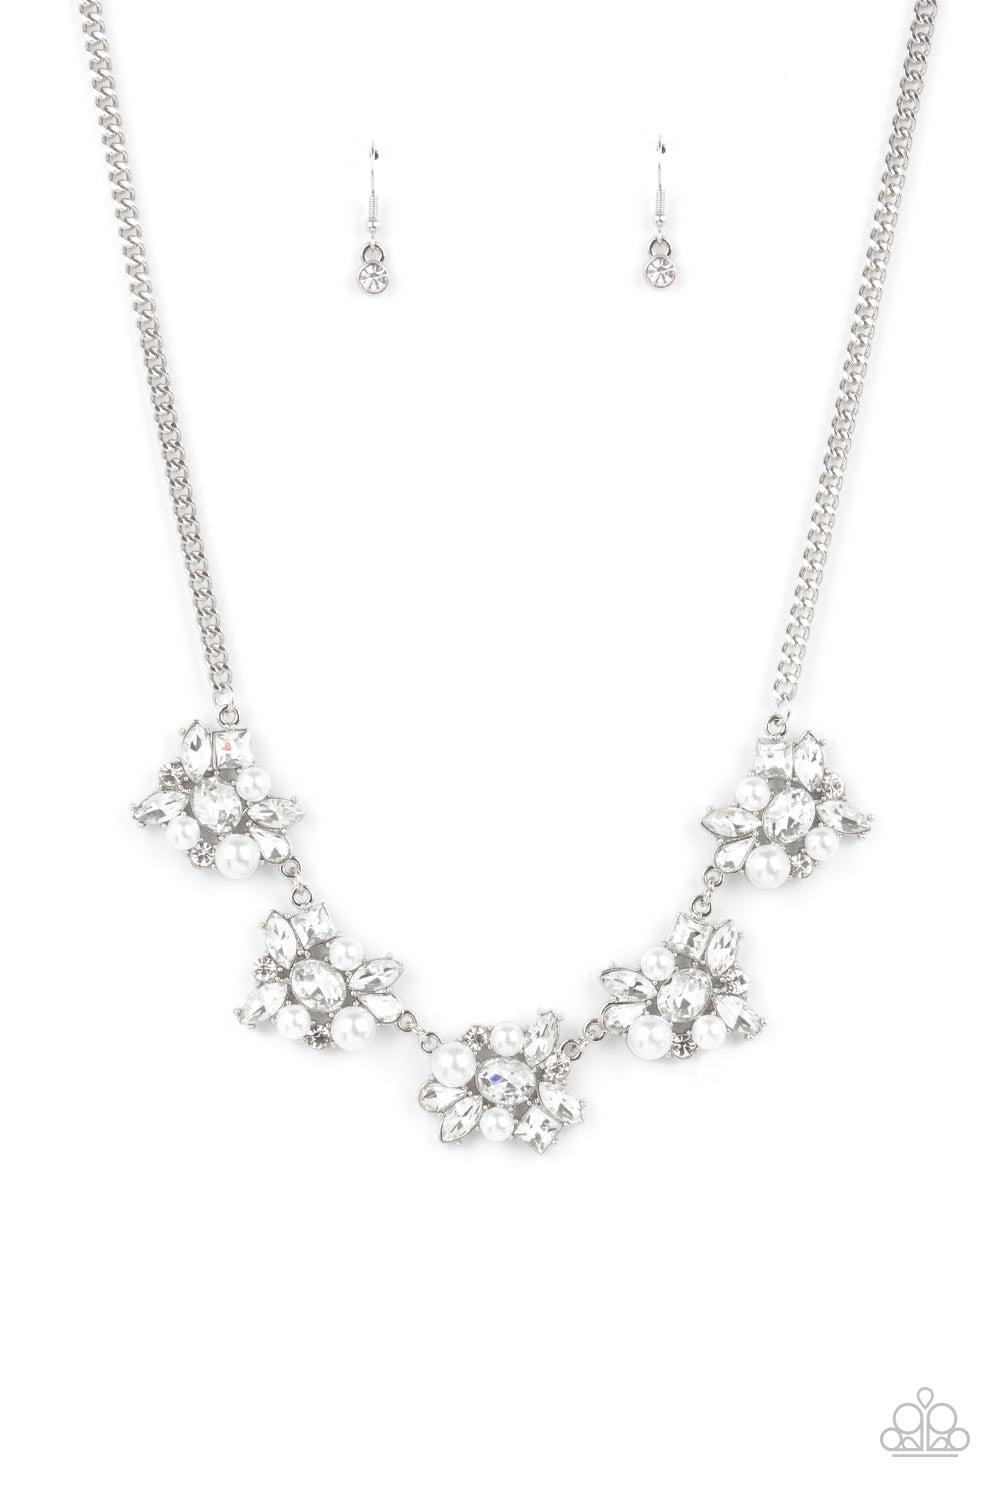 five-dollar-jewelry-heiress-of-them-all-white-necklace-paparazzi-accessories